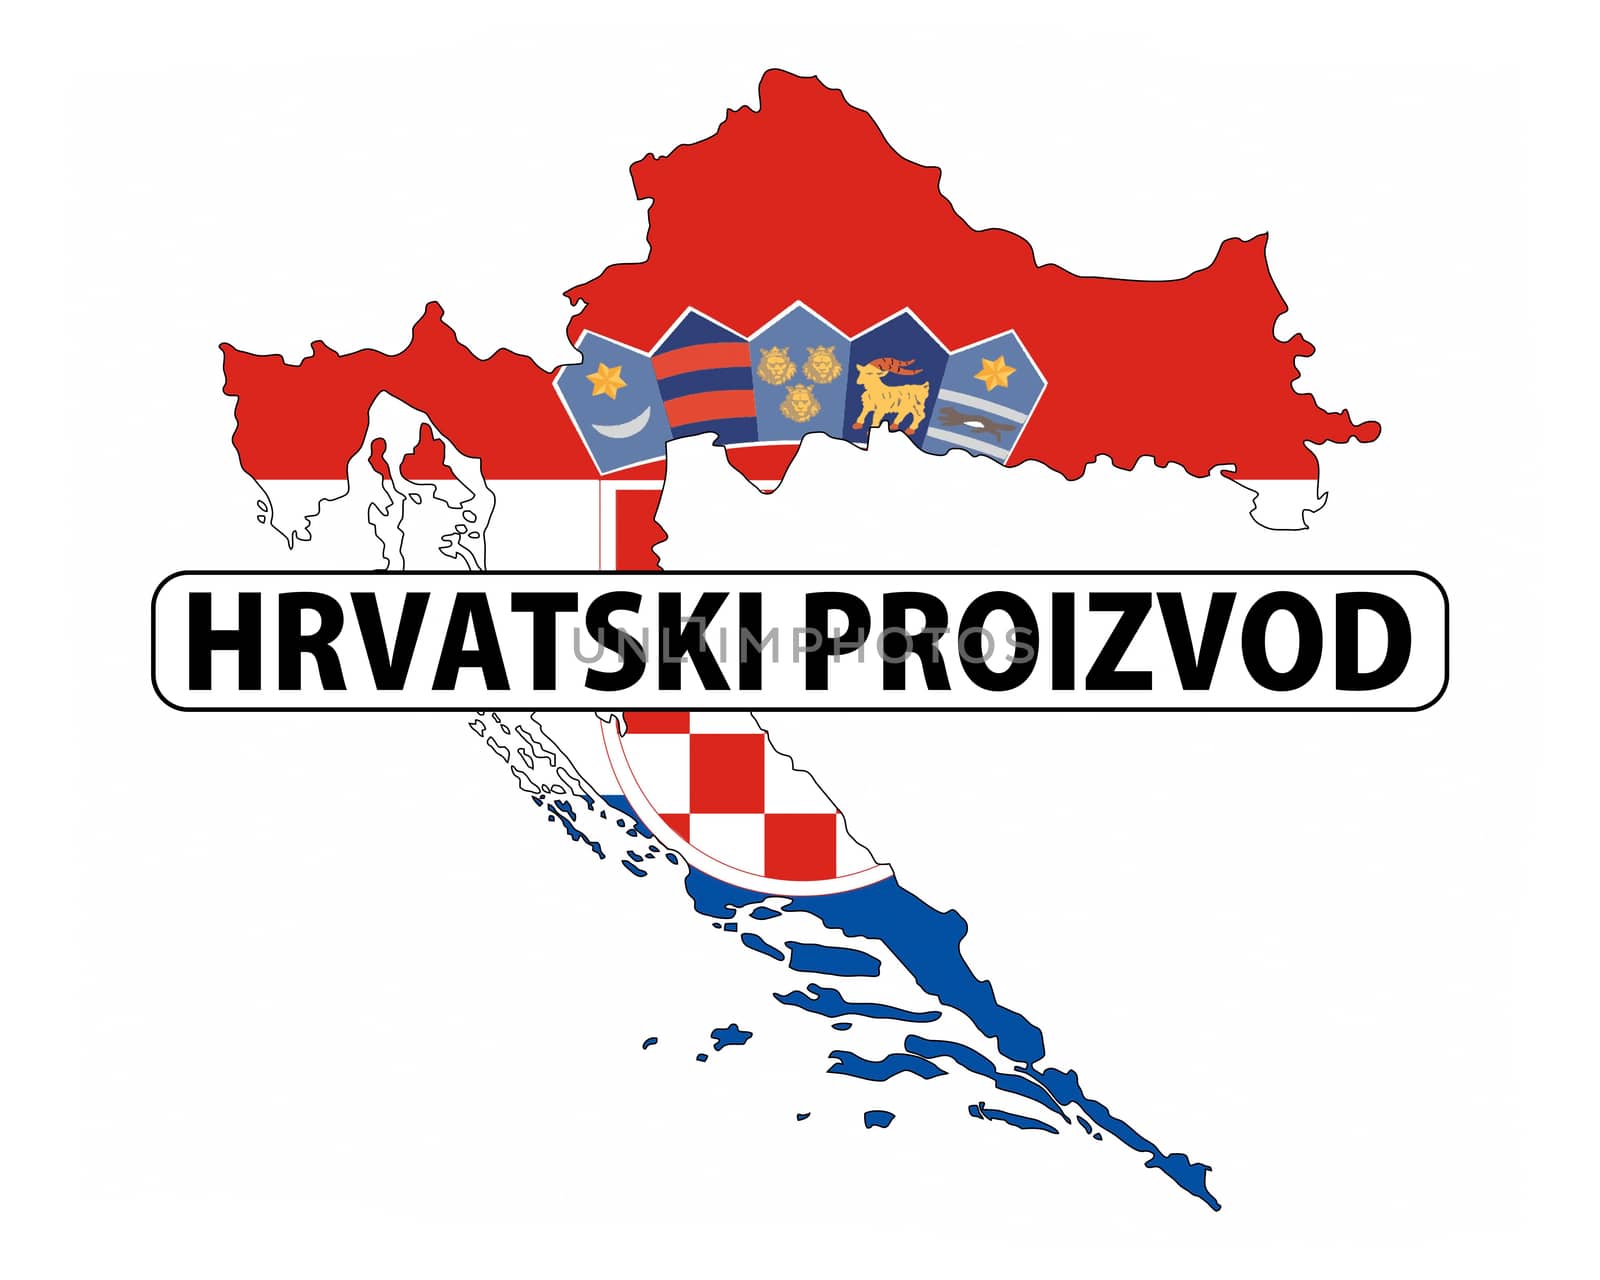 made in croatia country national flag map shape with text